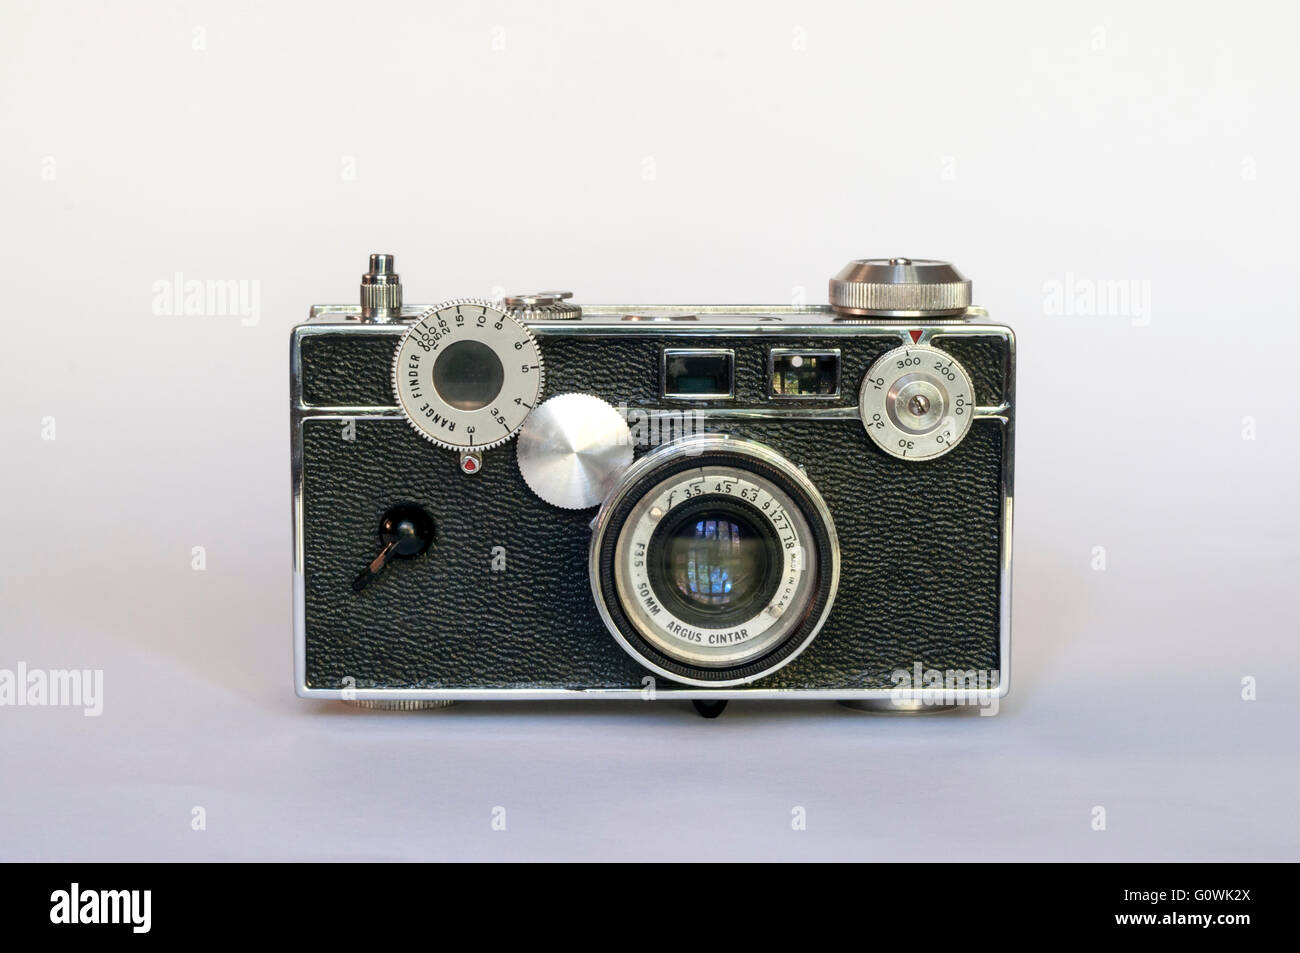 An American Argus C3 coupled rangefinder camera made in the 1940s. Stock Photo